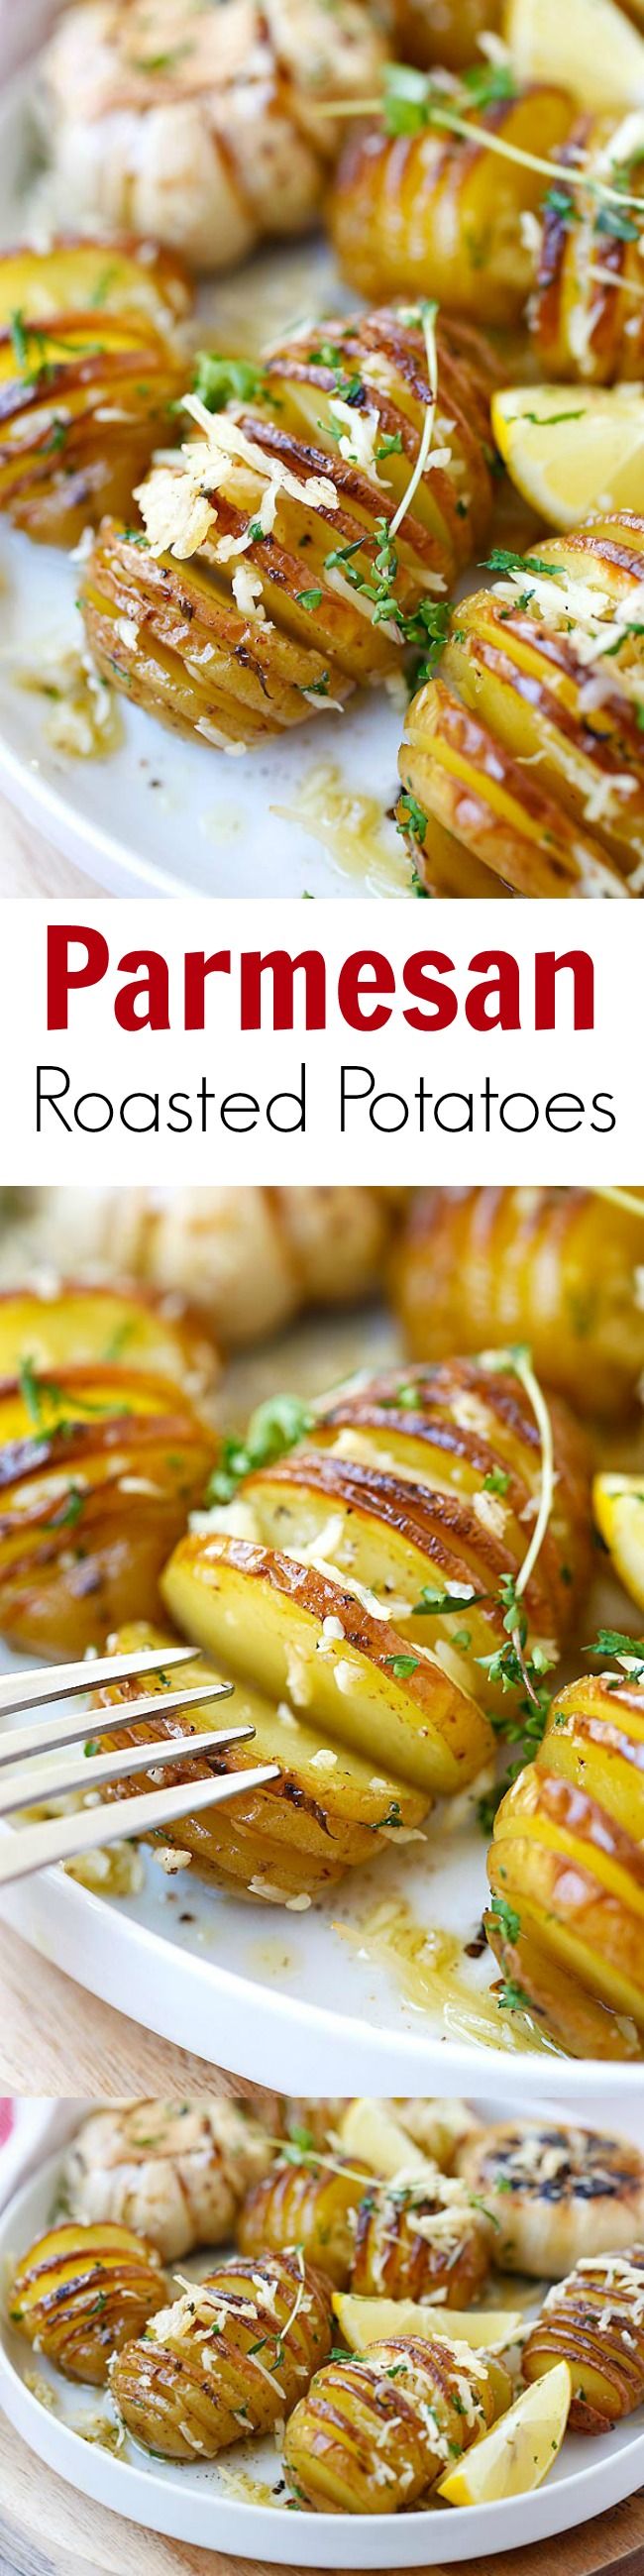 Parmesan Roasted Potatoes – the easiest and BEST roasted potatoes with Parmesan cheese, butter and herbs. SO good you’ll want to make it every day!! | rasamalaysia.com